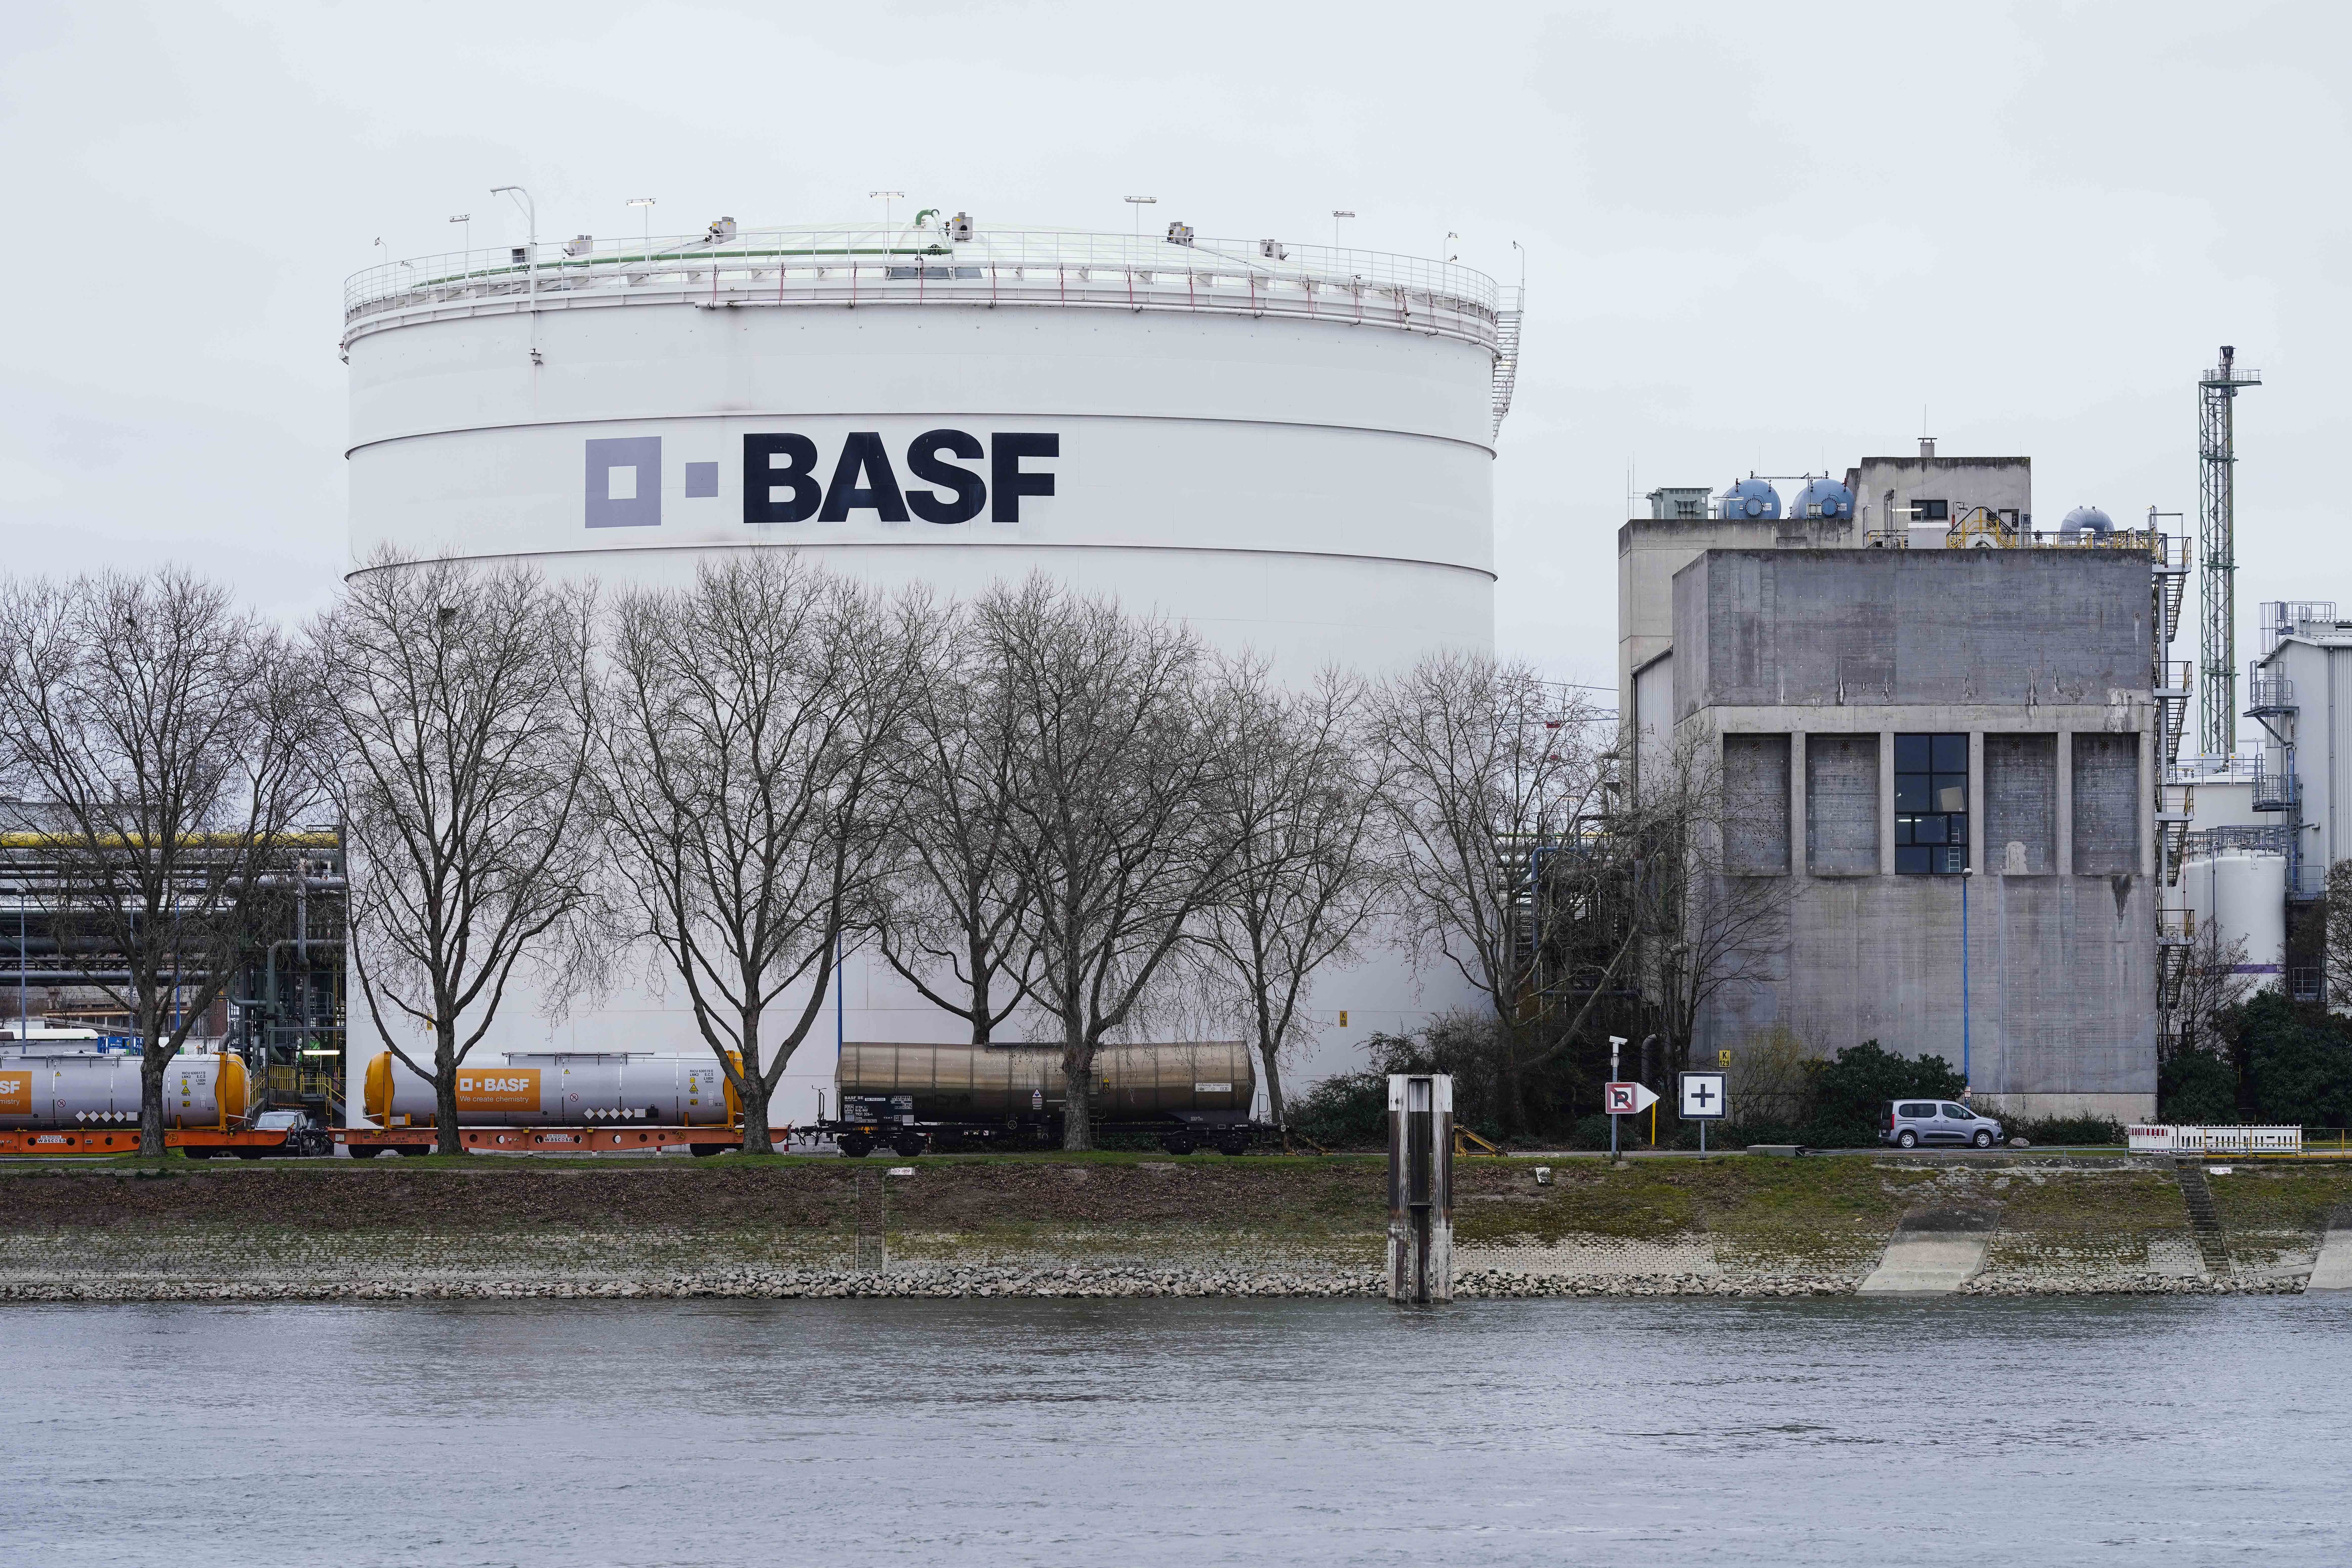 The BASF plant in Ludwigshafen.